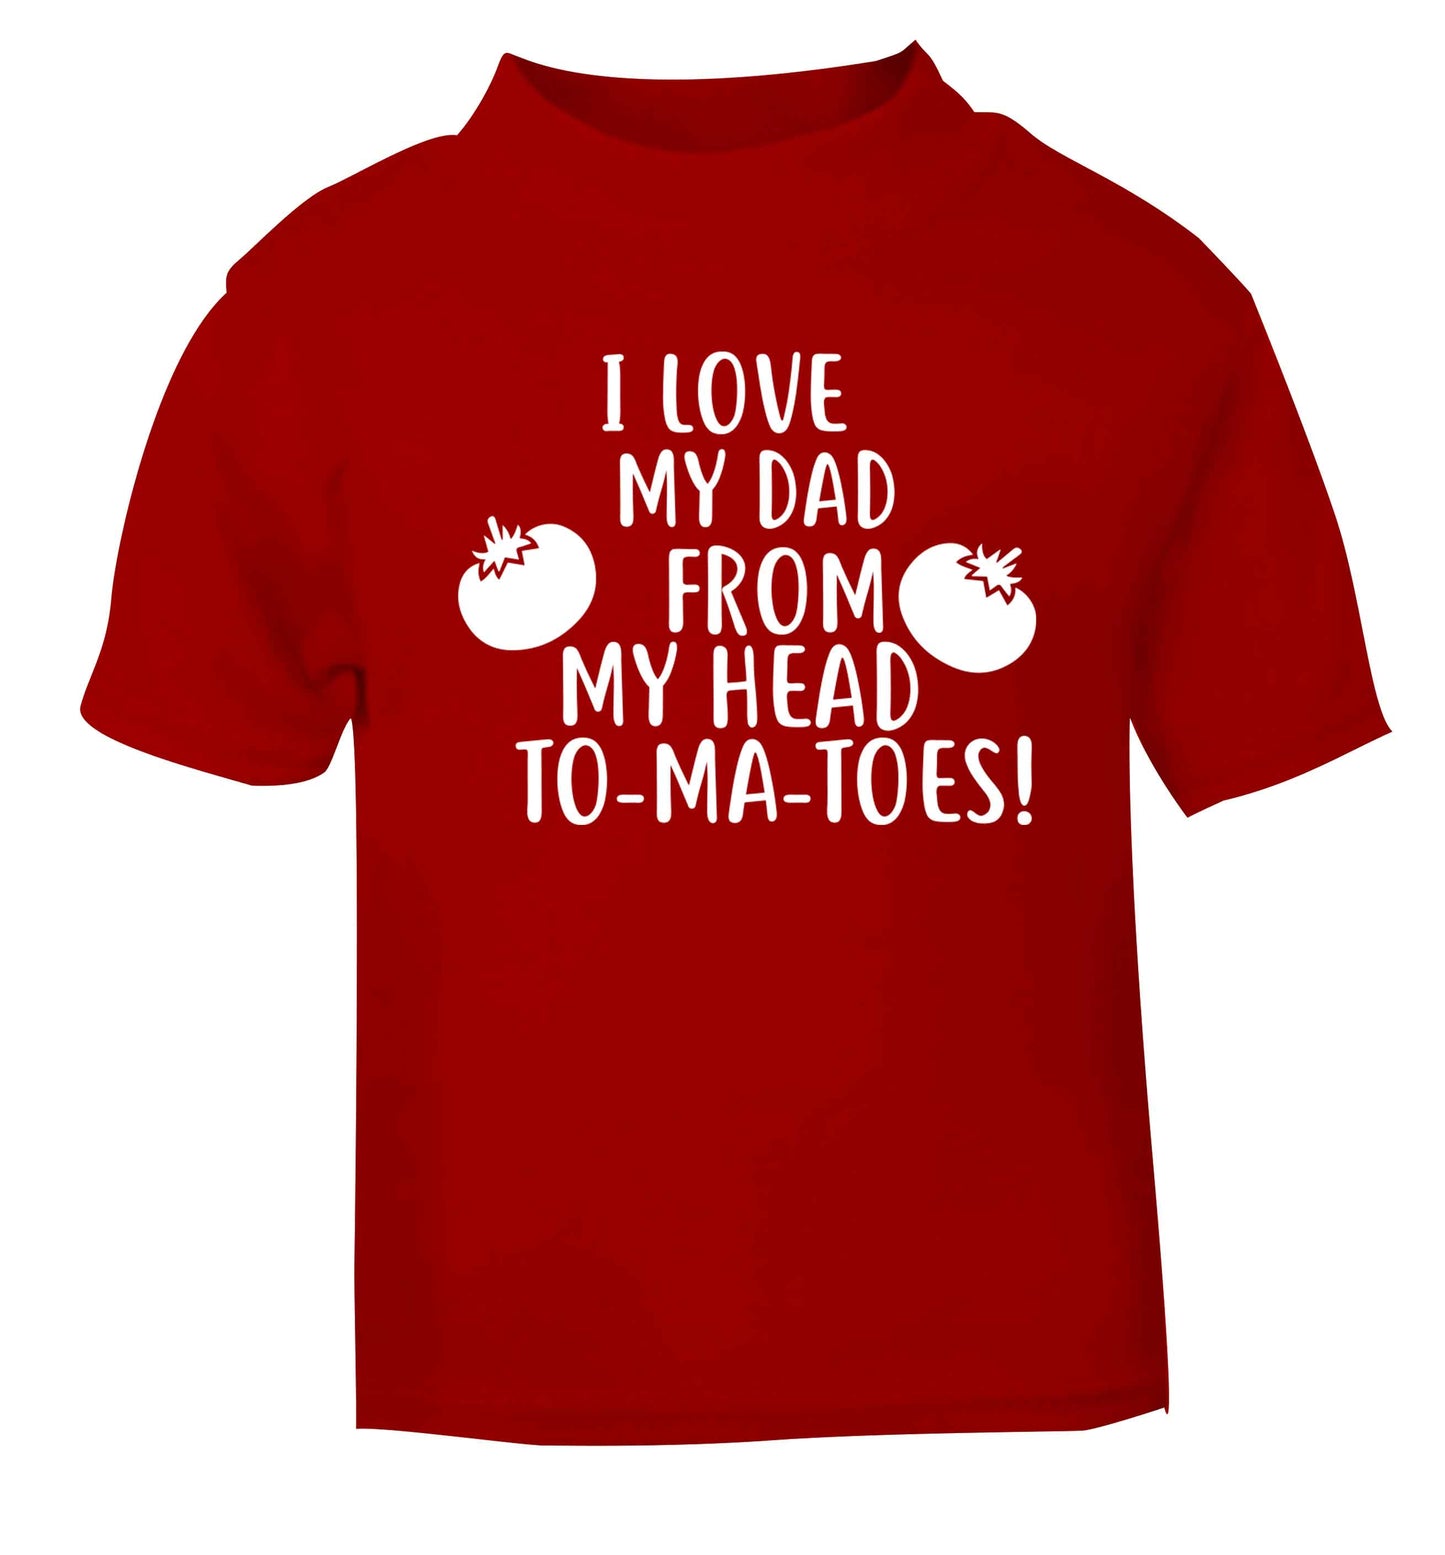 I love my dad from my head to-ma-toes red baby toddler Tshirt 2 Years